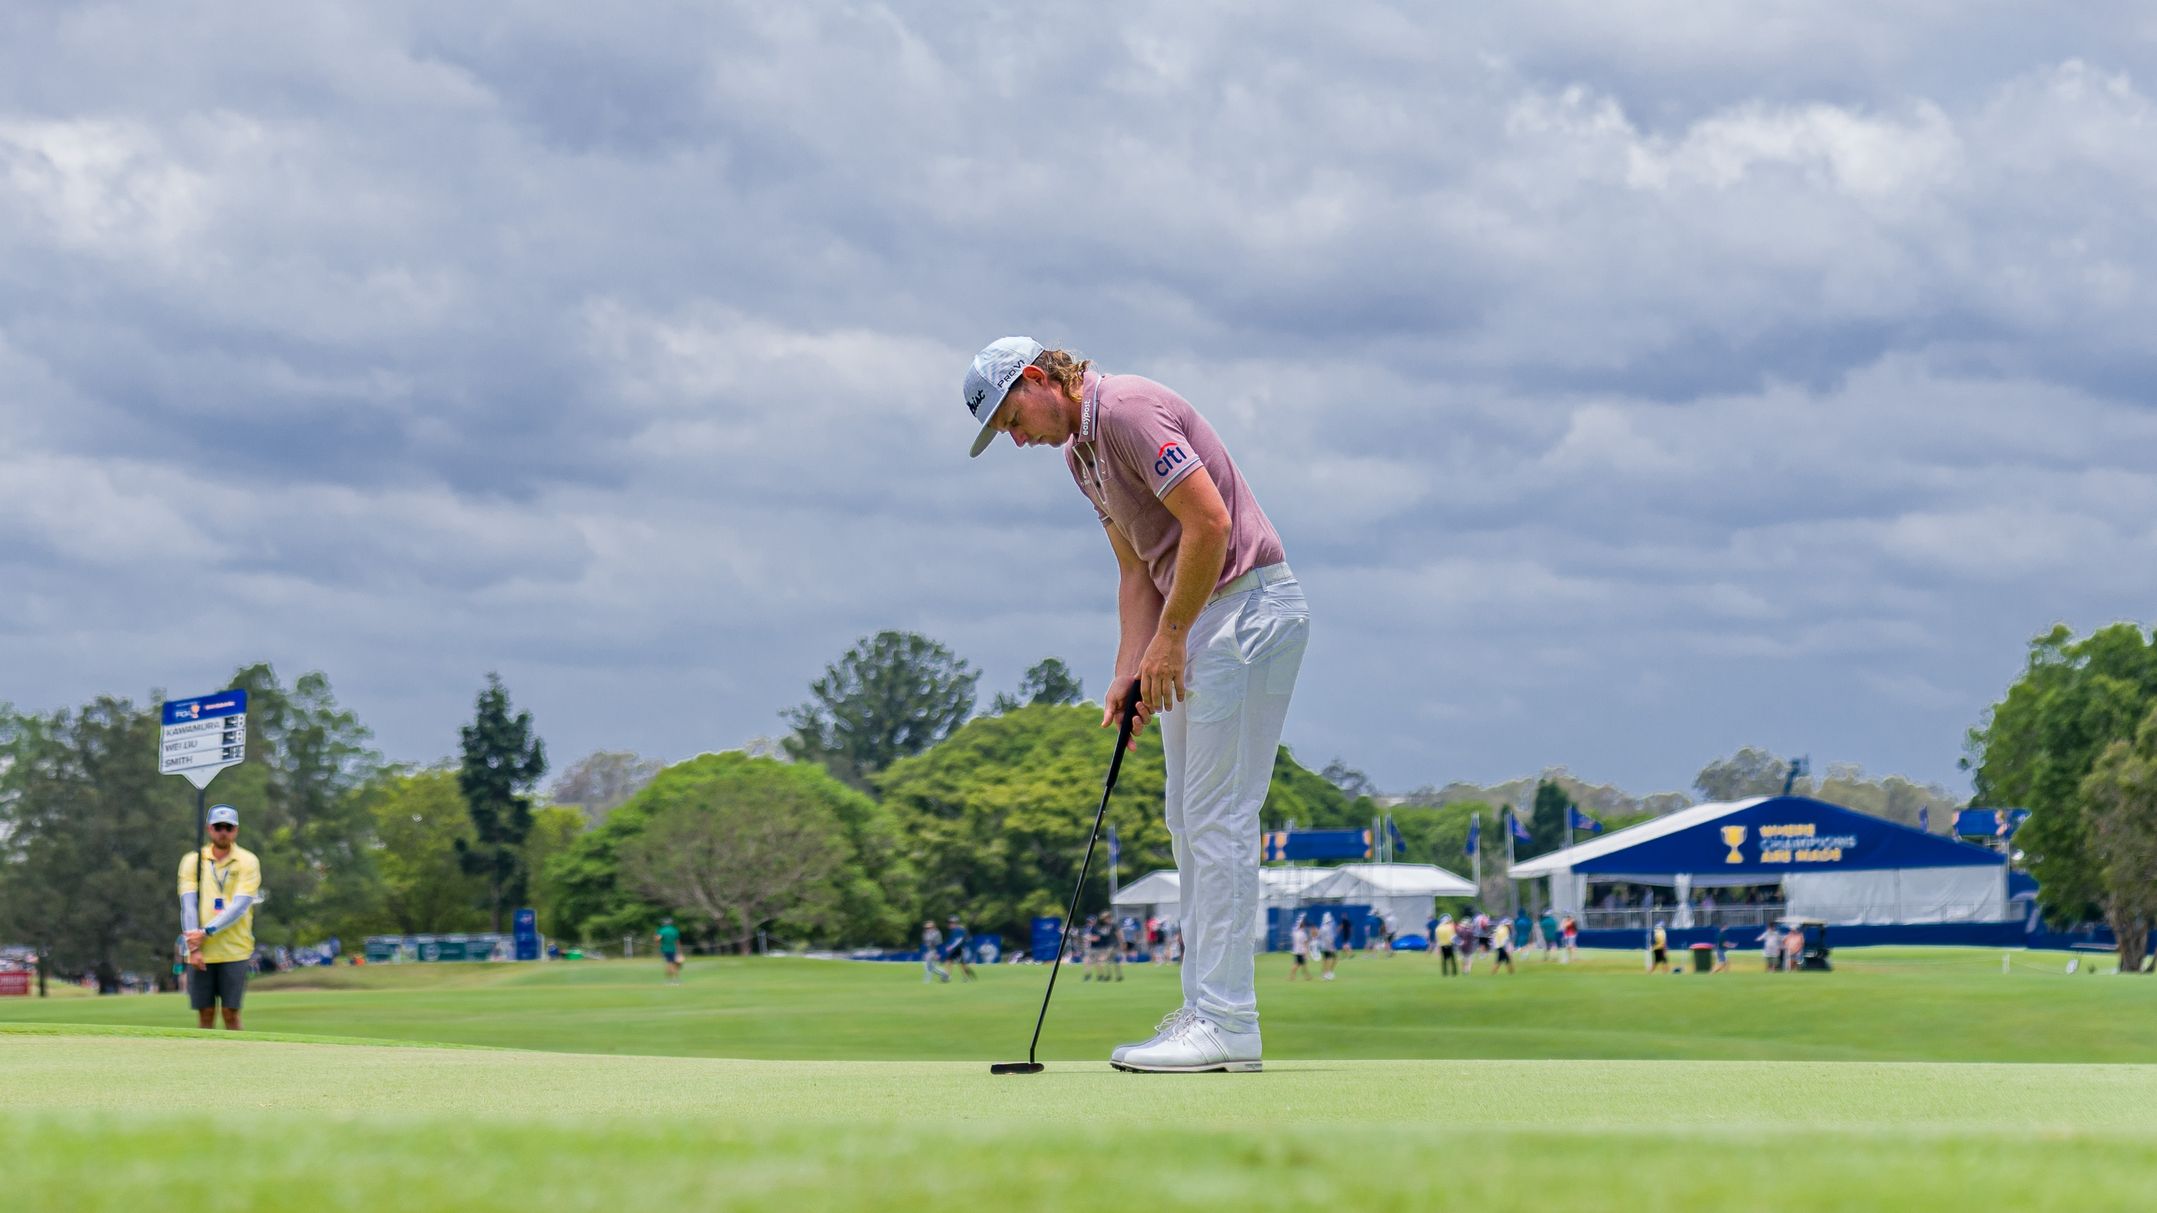 Cameron Smith of Australia on the 5th hole during day four of the 2022 Australian PGA Championship at the Royal Queensland.